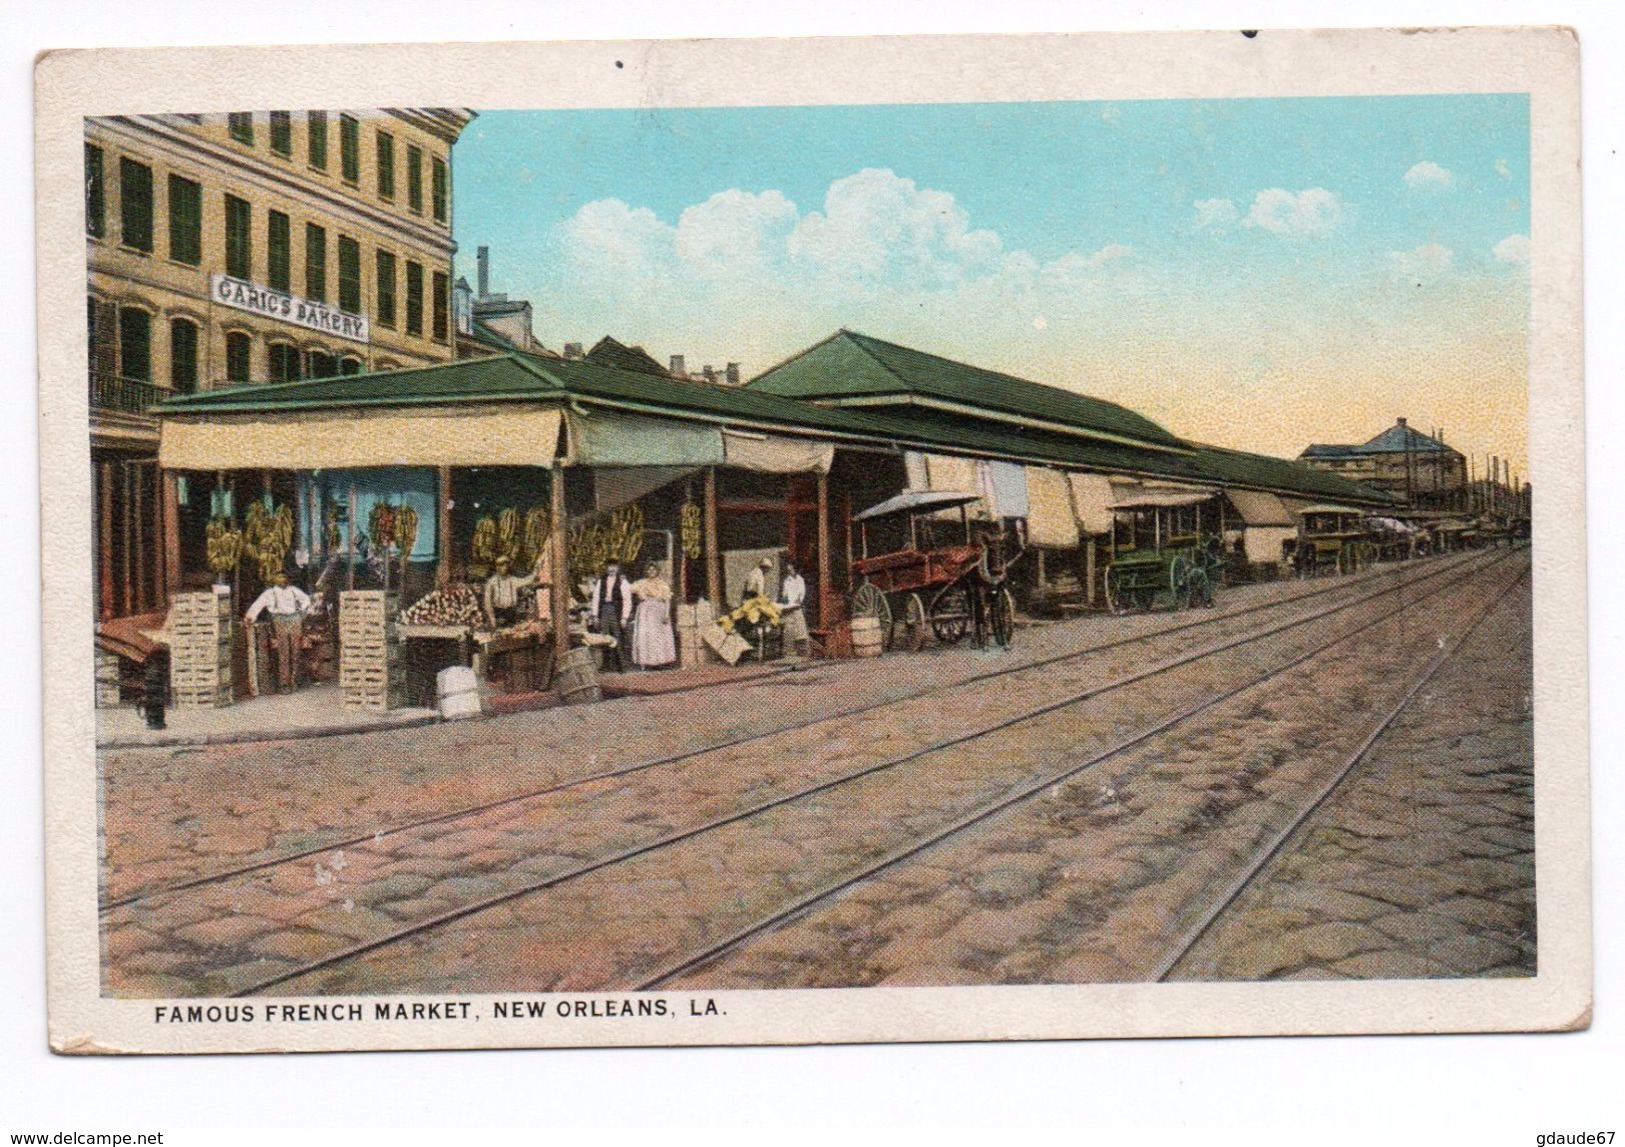 FAMOUS FRENCH MARKET - New Orleans